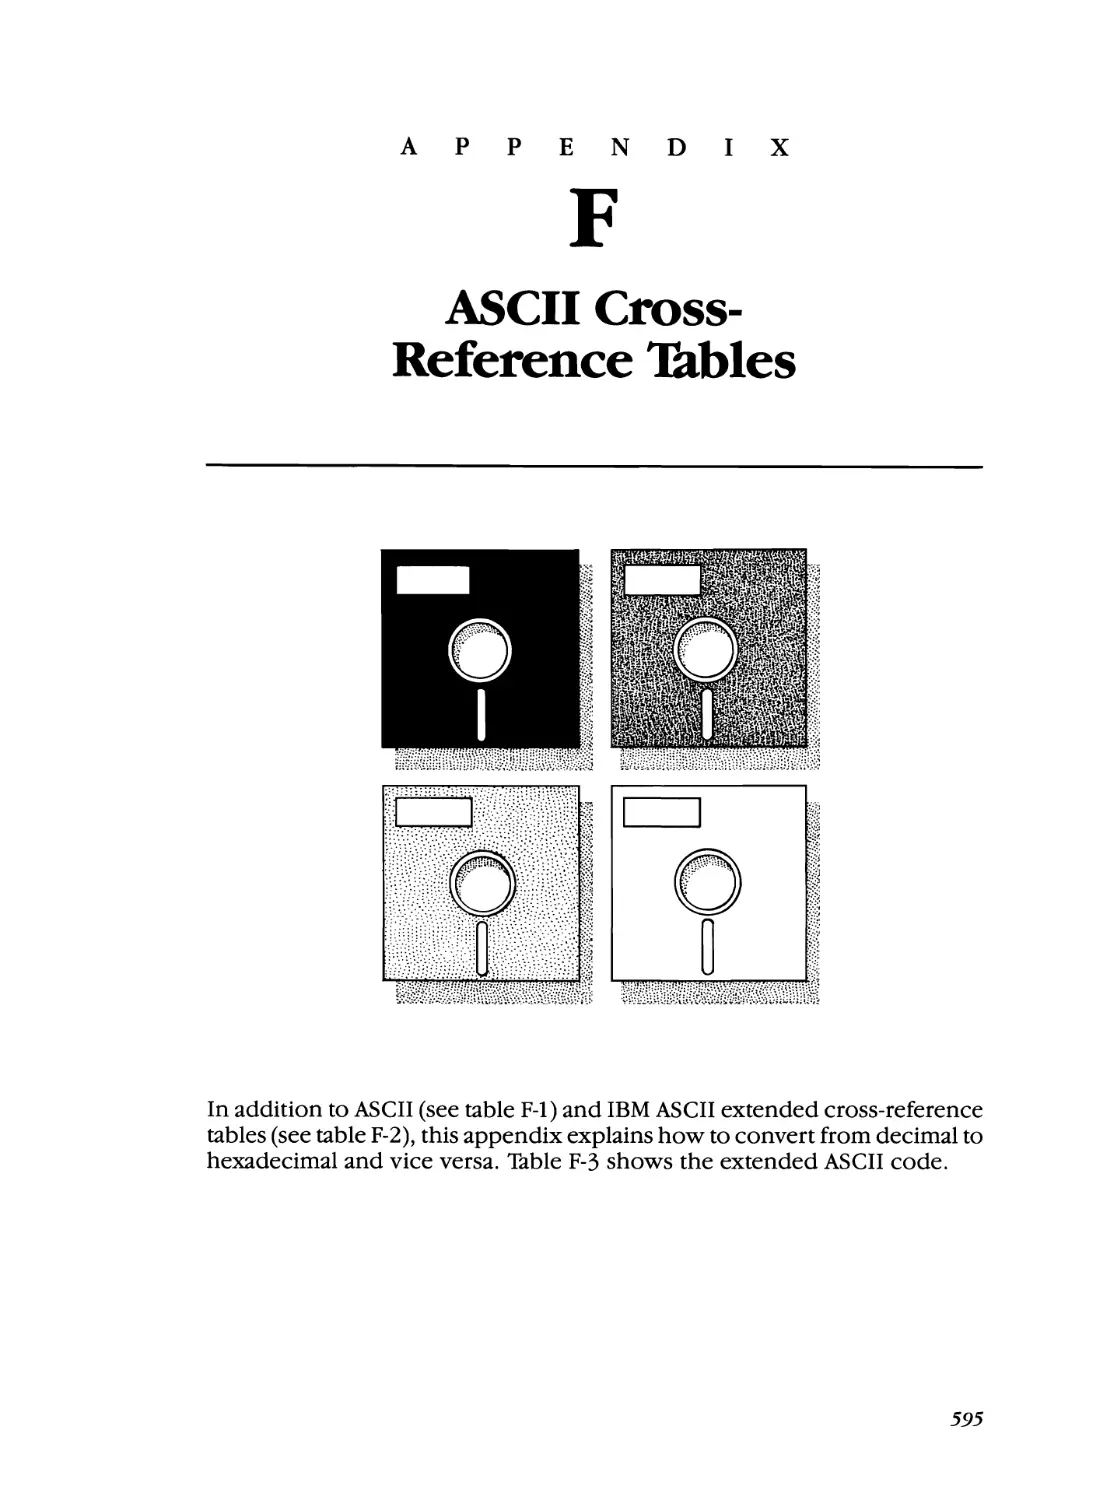 Appendix F - ASCII Cross-Reference Tables